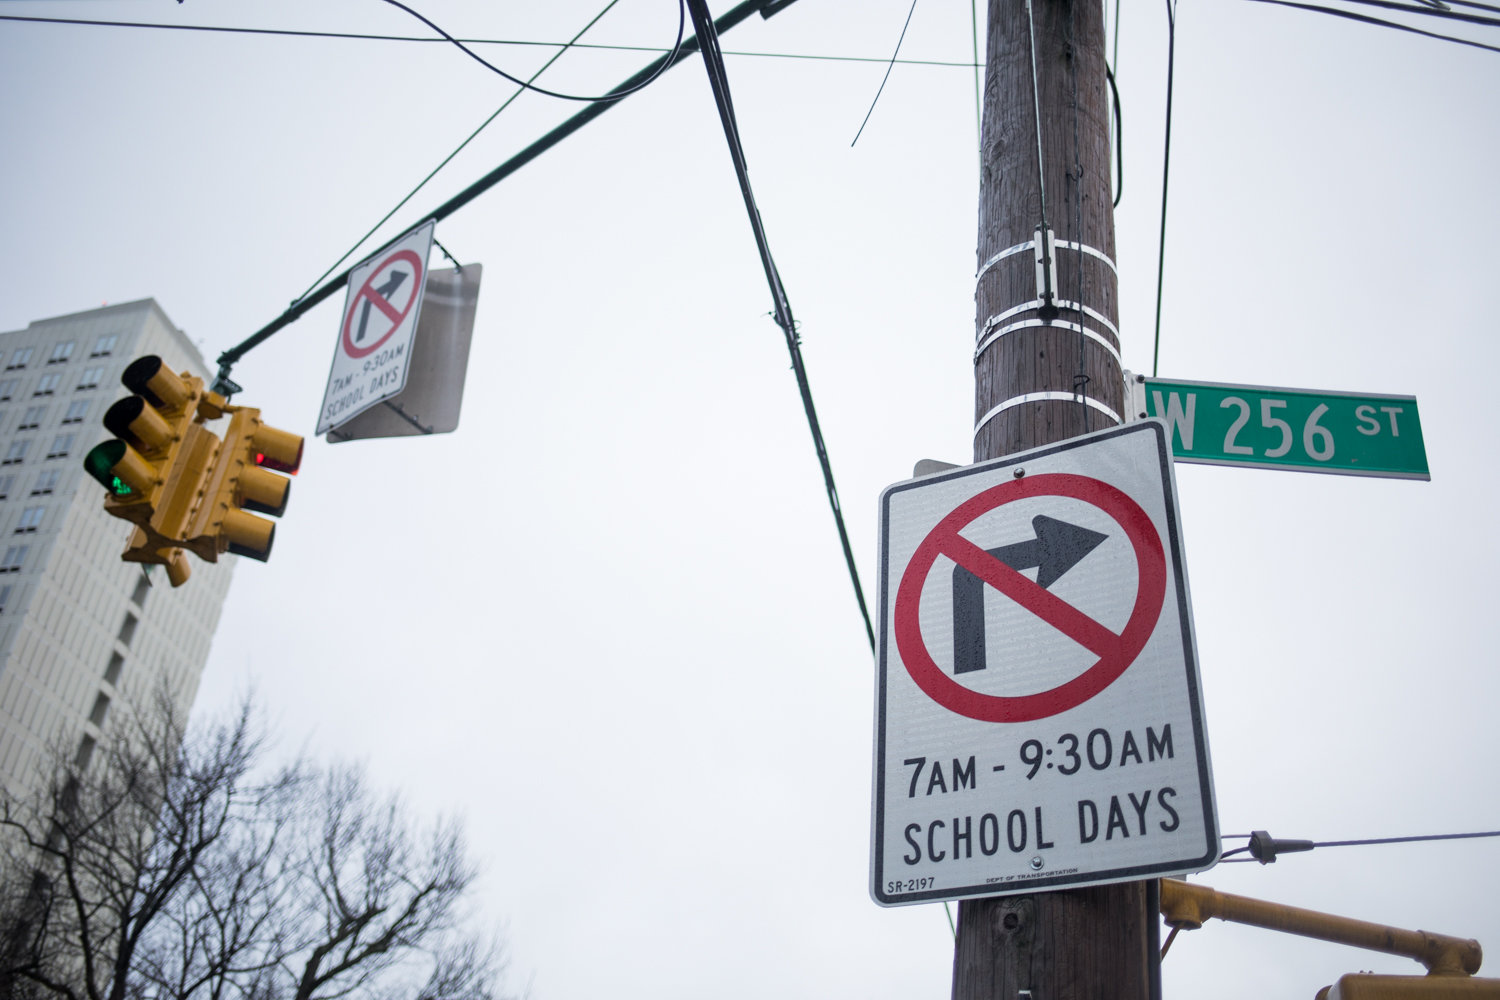 Traffic signs indicate cars cannot turn onto West 256th Street from Mosholu Avenue during early-morning.drop-off on school days. Parents and neighbors have complained of rampant traffic problems during both dropoff and pick-up at P.S. 81 Robert J. Christen School.